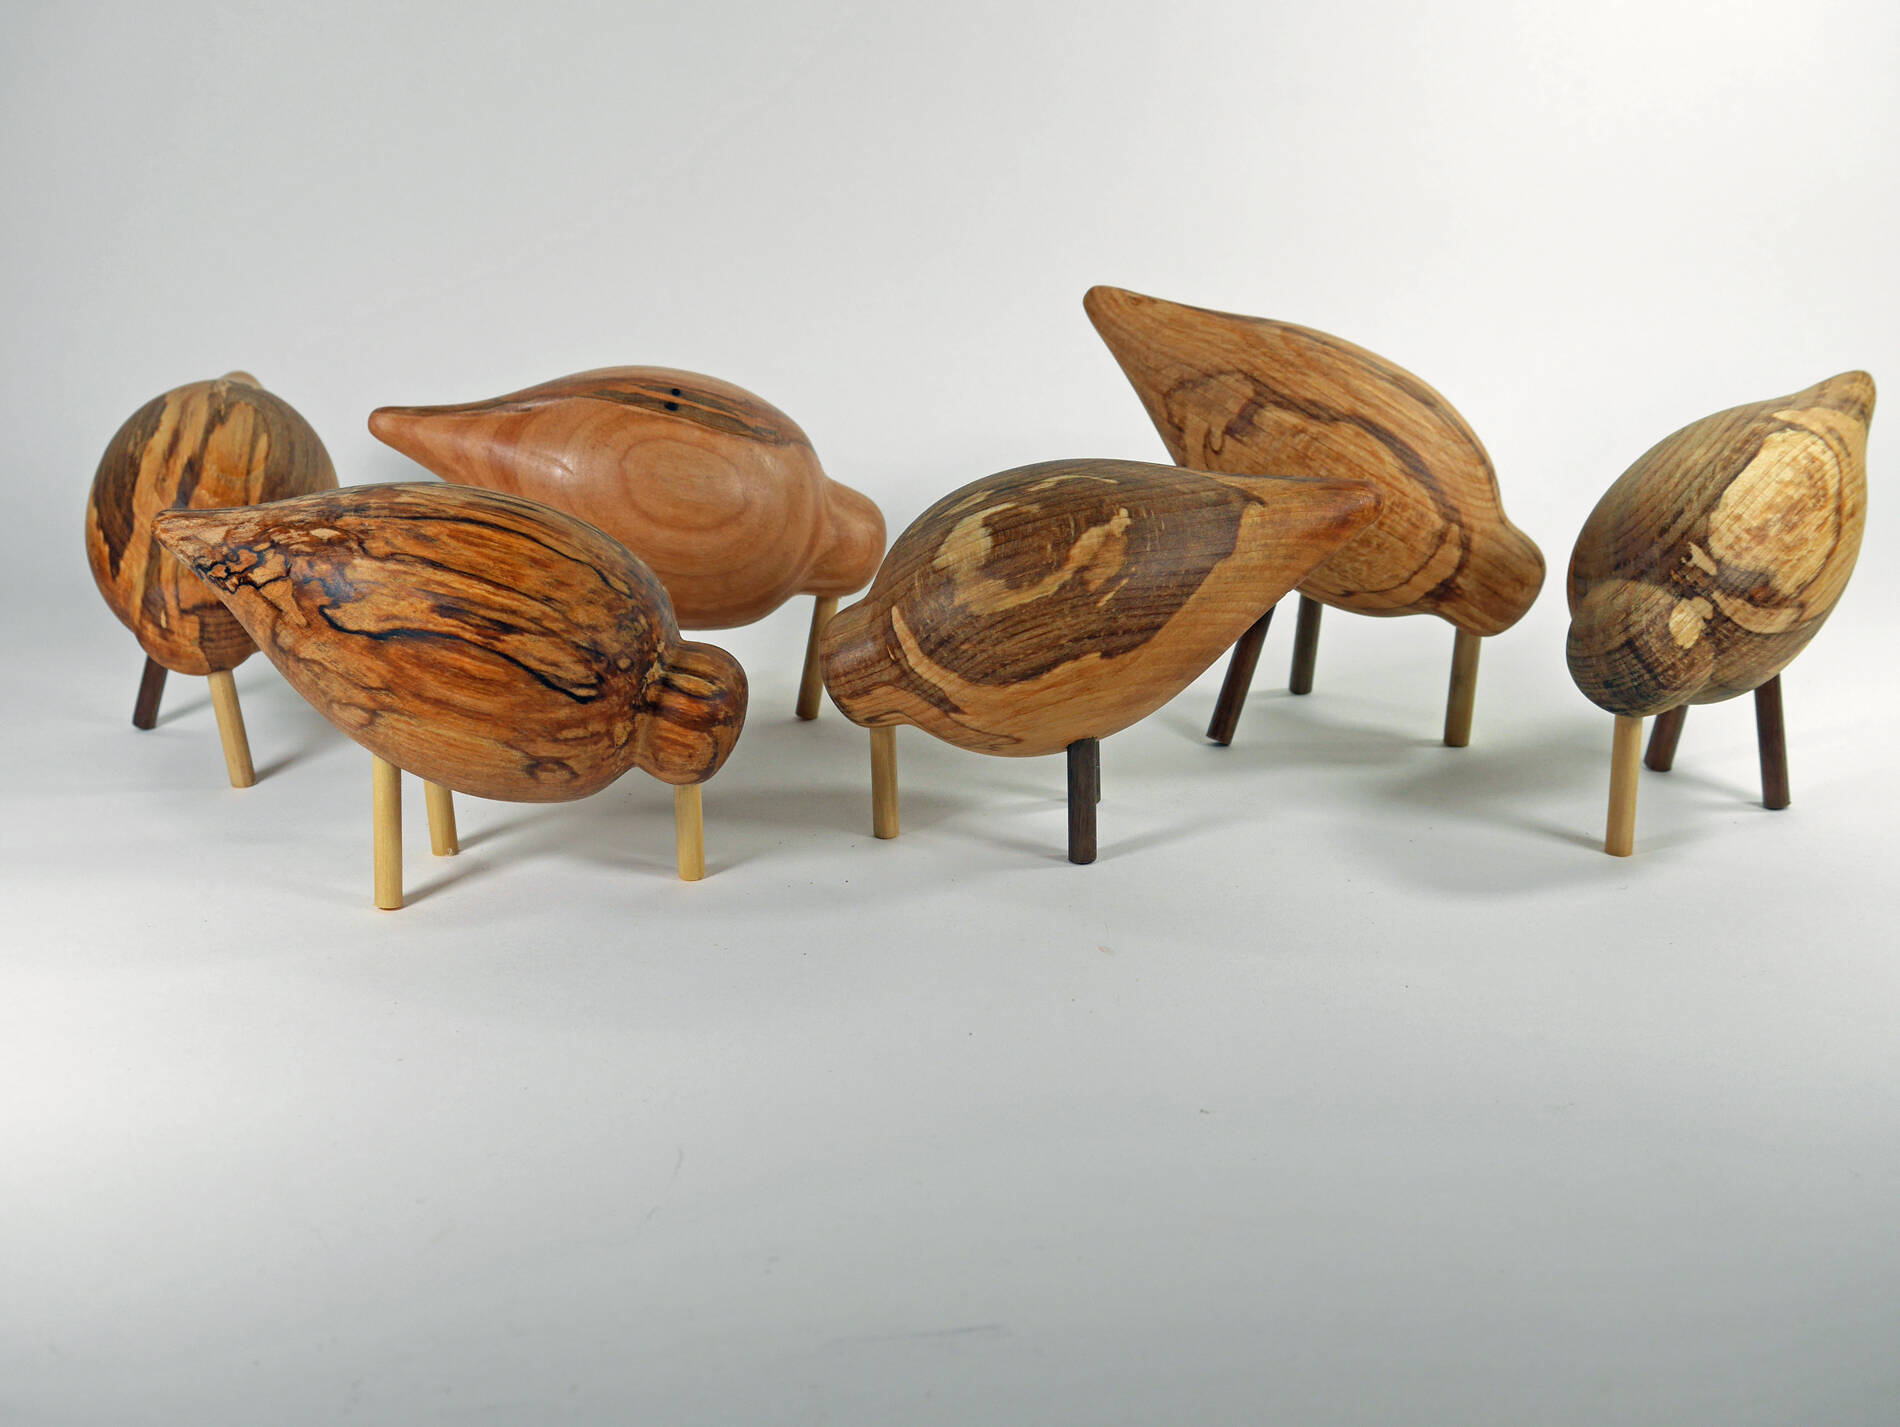 “Shorebirds Grouping 3,” woodworking by Ted Heuer is on display at Ptarmigan Arts during a popup event running July 7-9 in Homer, Alaska. Photo courtesy of Ptarmigan Arts